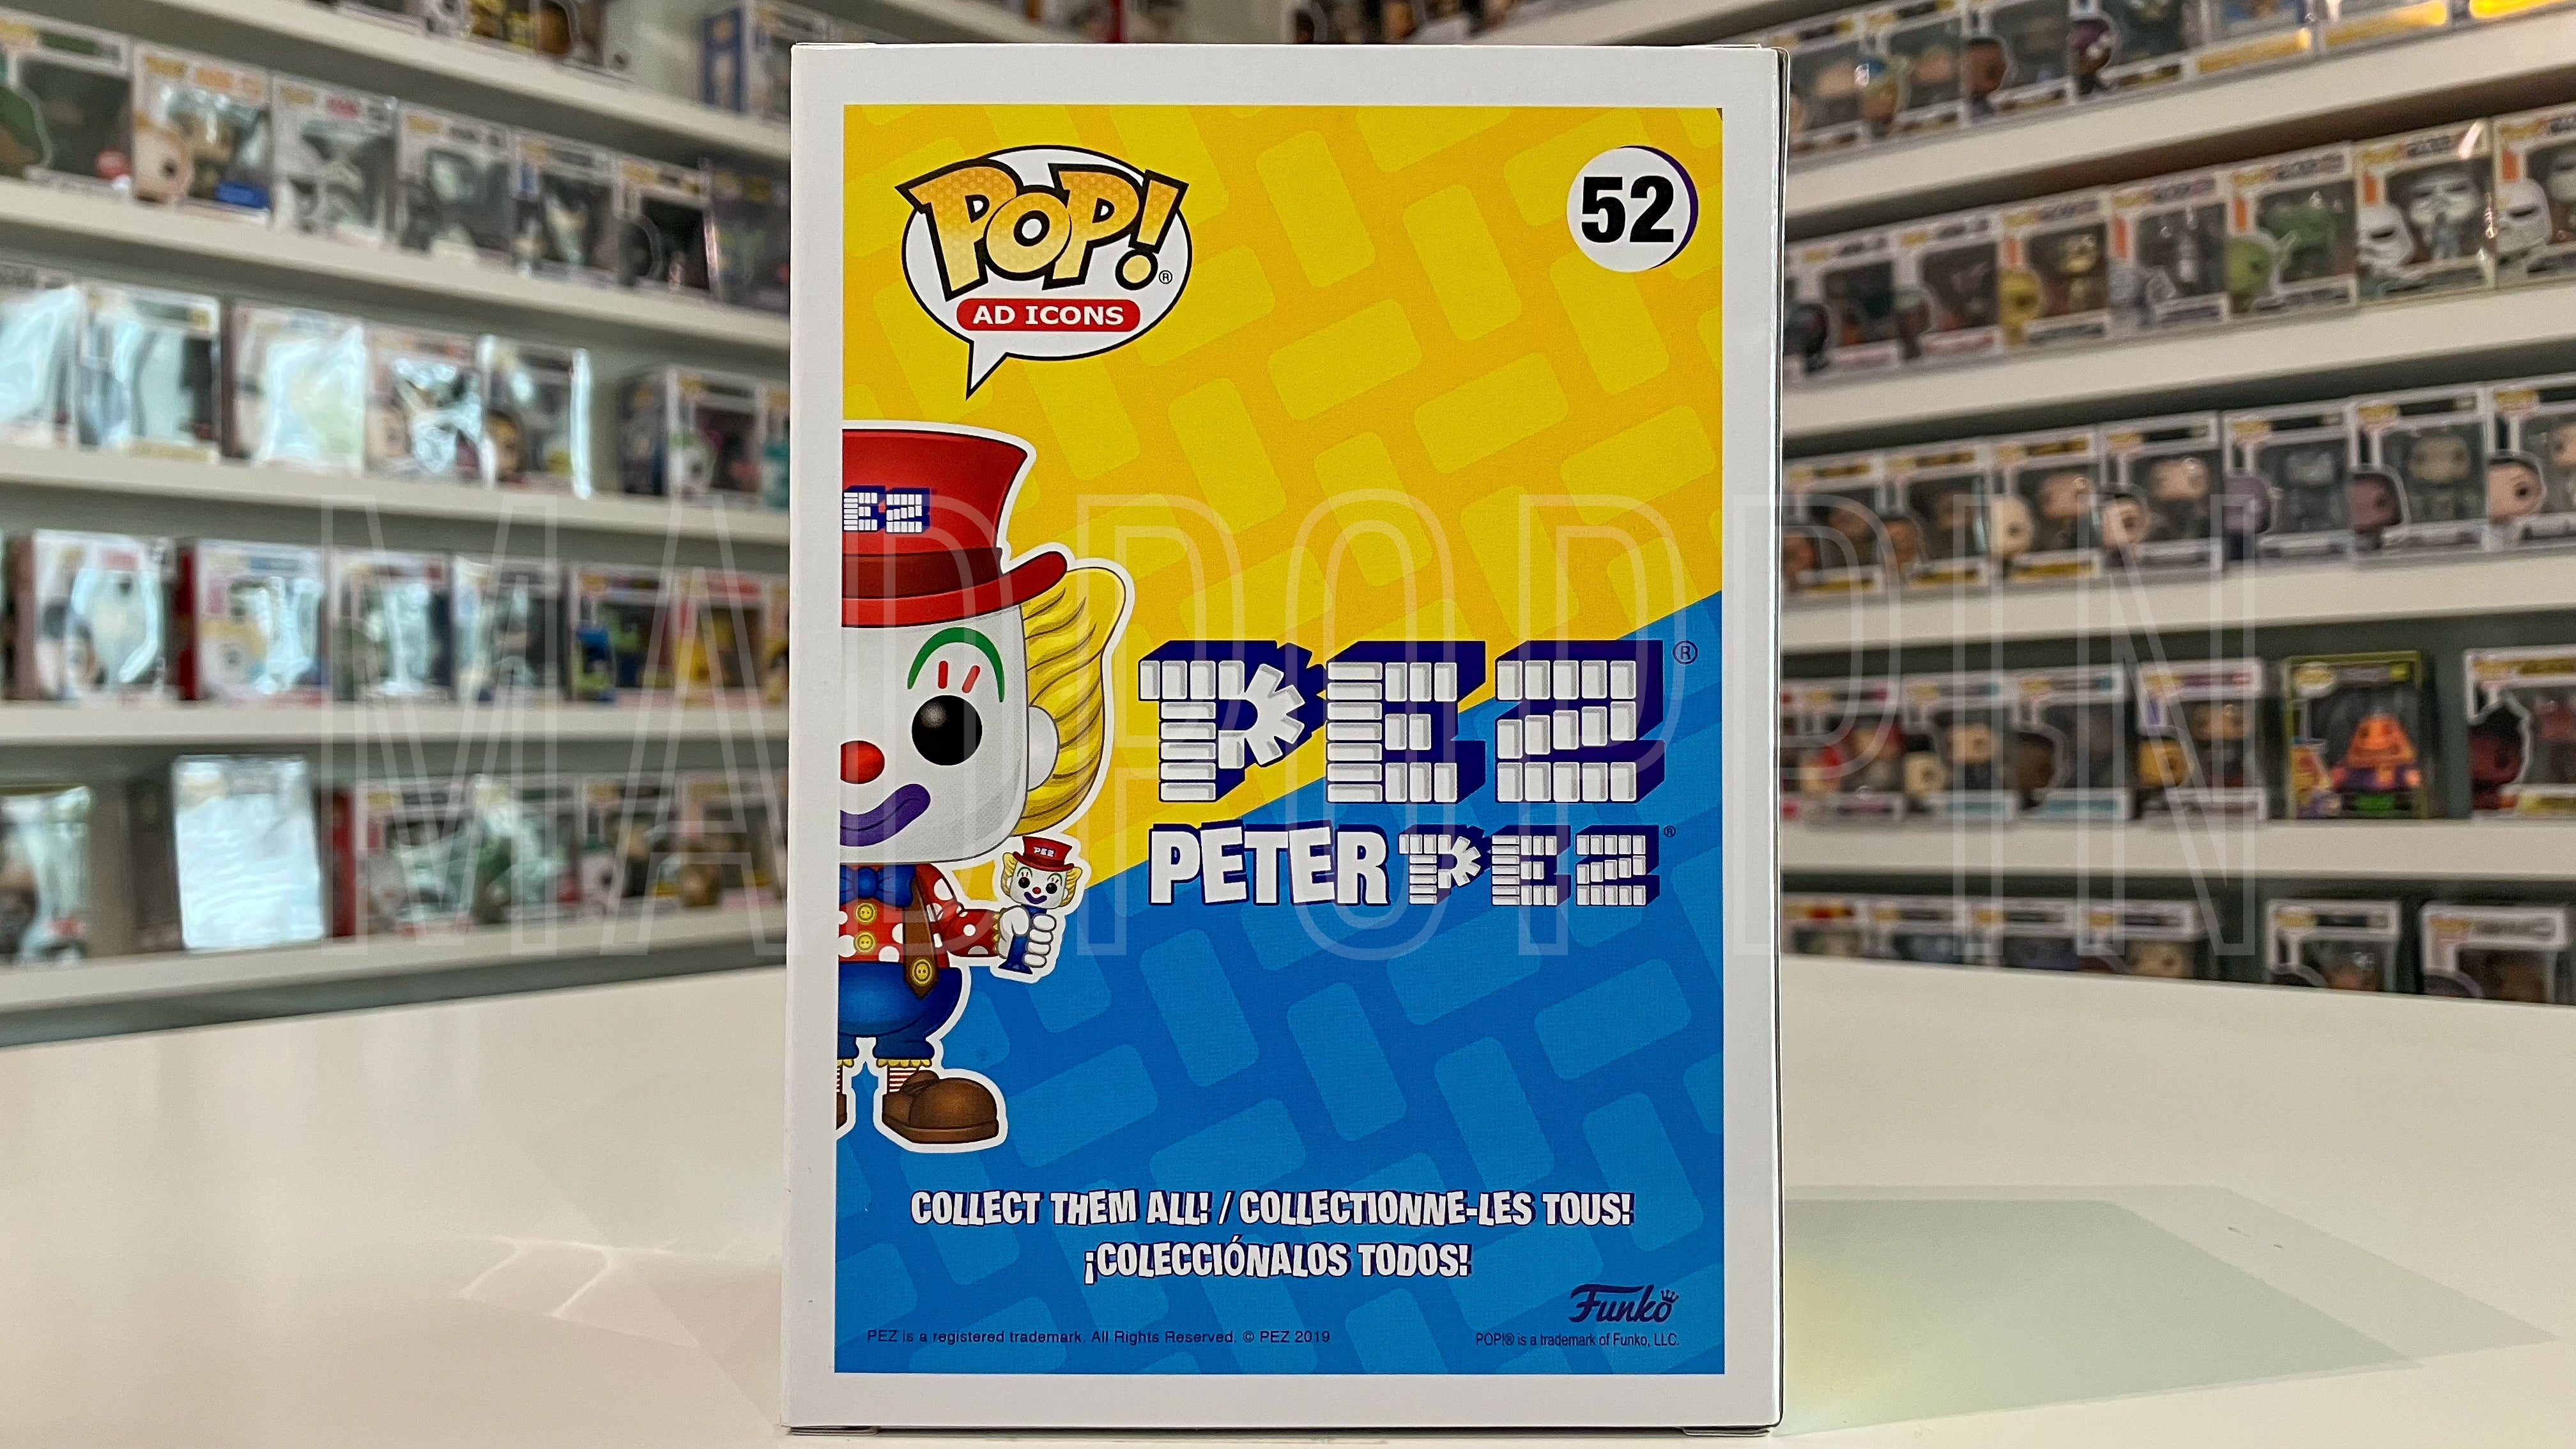 Funko POP! AD Icons Peter Pez Toy Tokyo San Diego 2019 Limited Edition #52